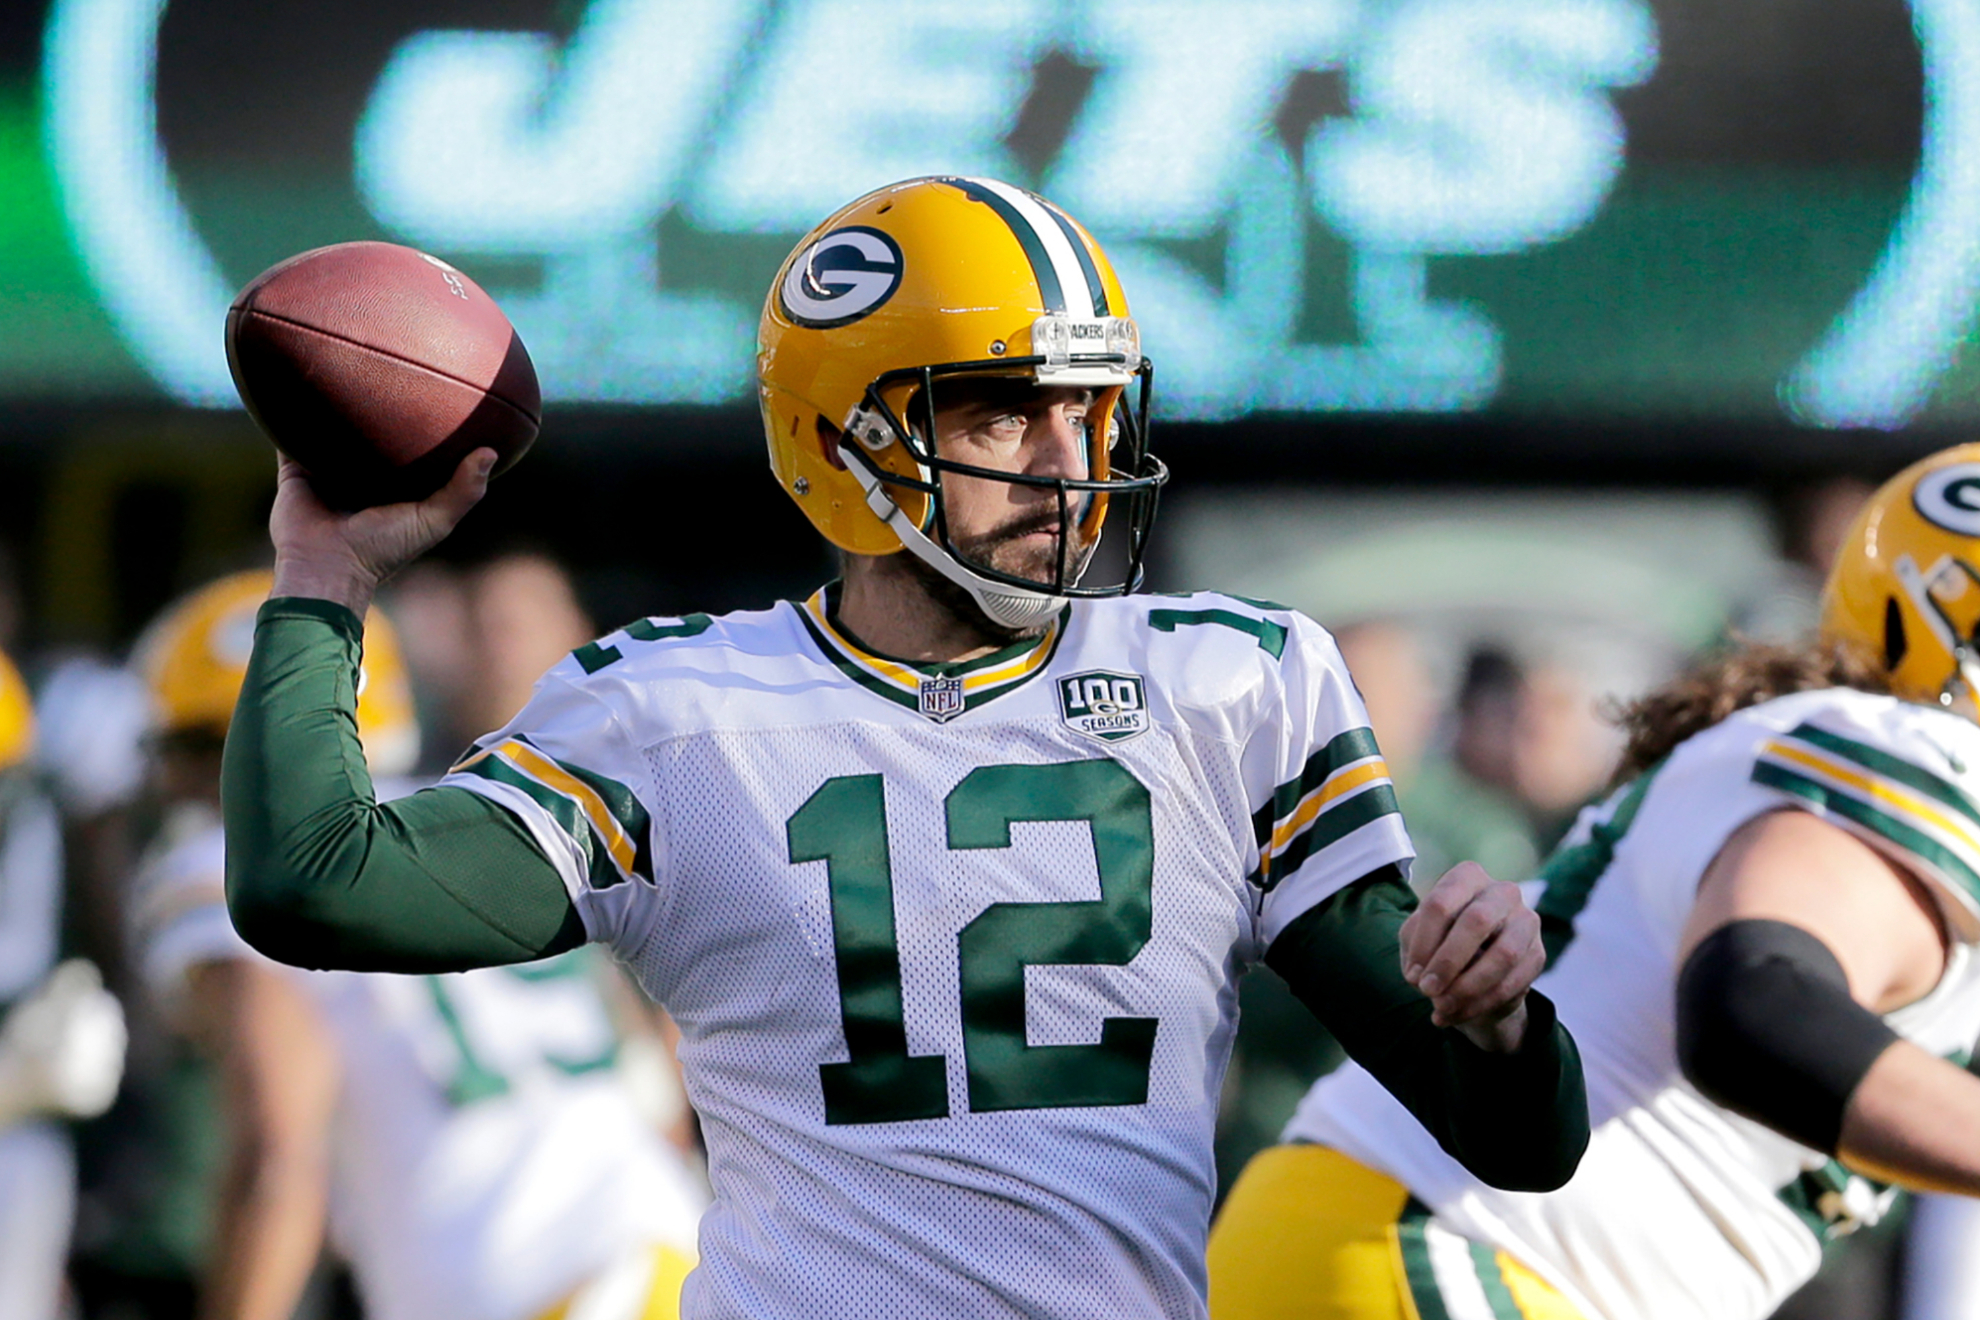 Aaron Rodgers has been wearing the No.12 jersey in his professional career.